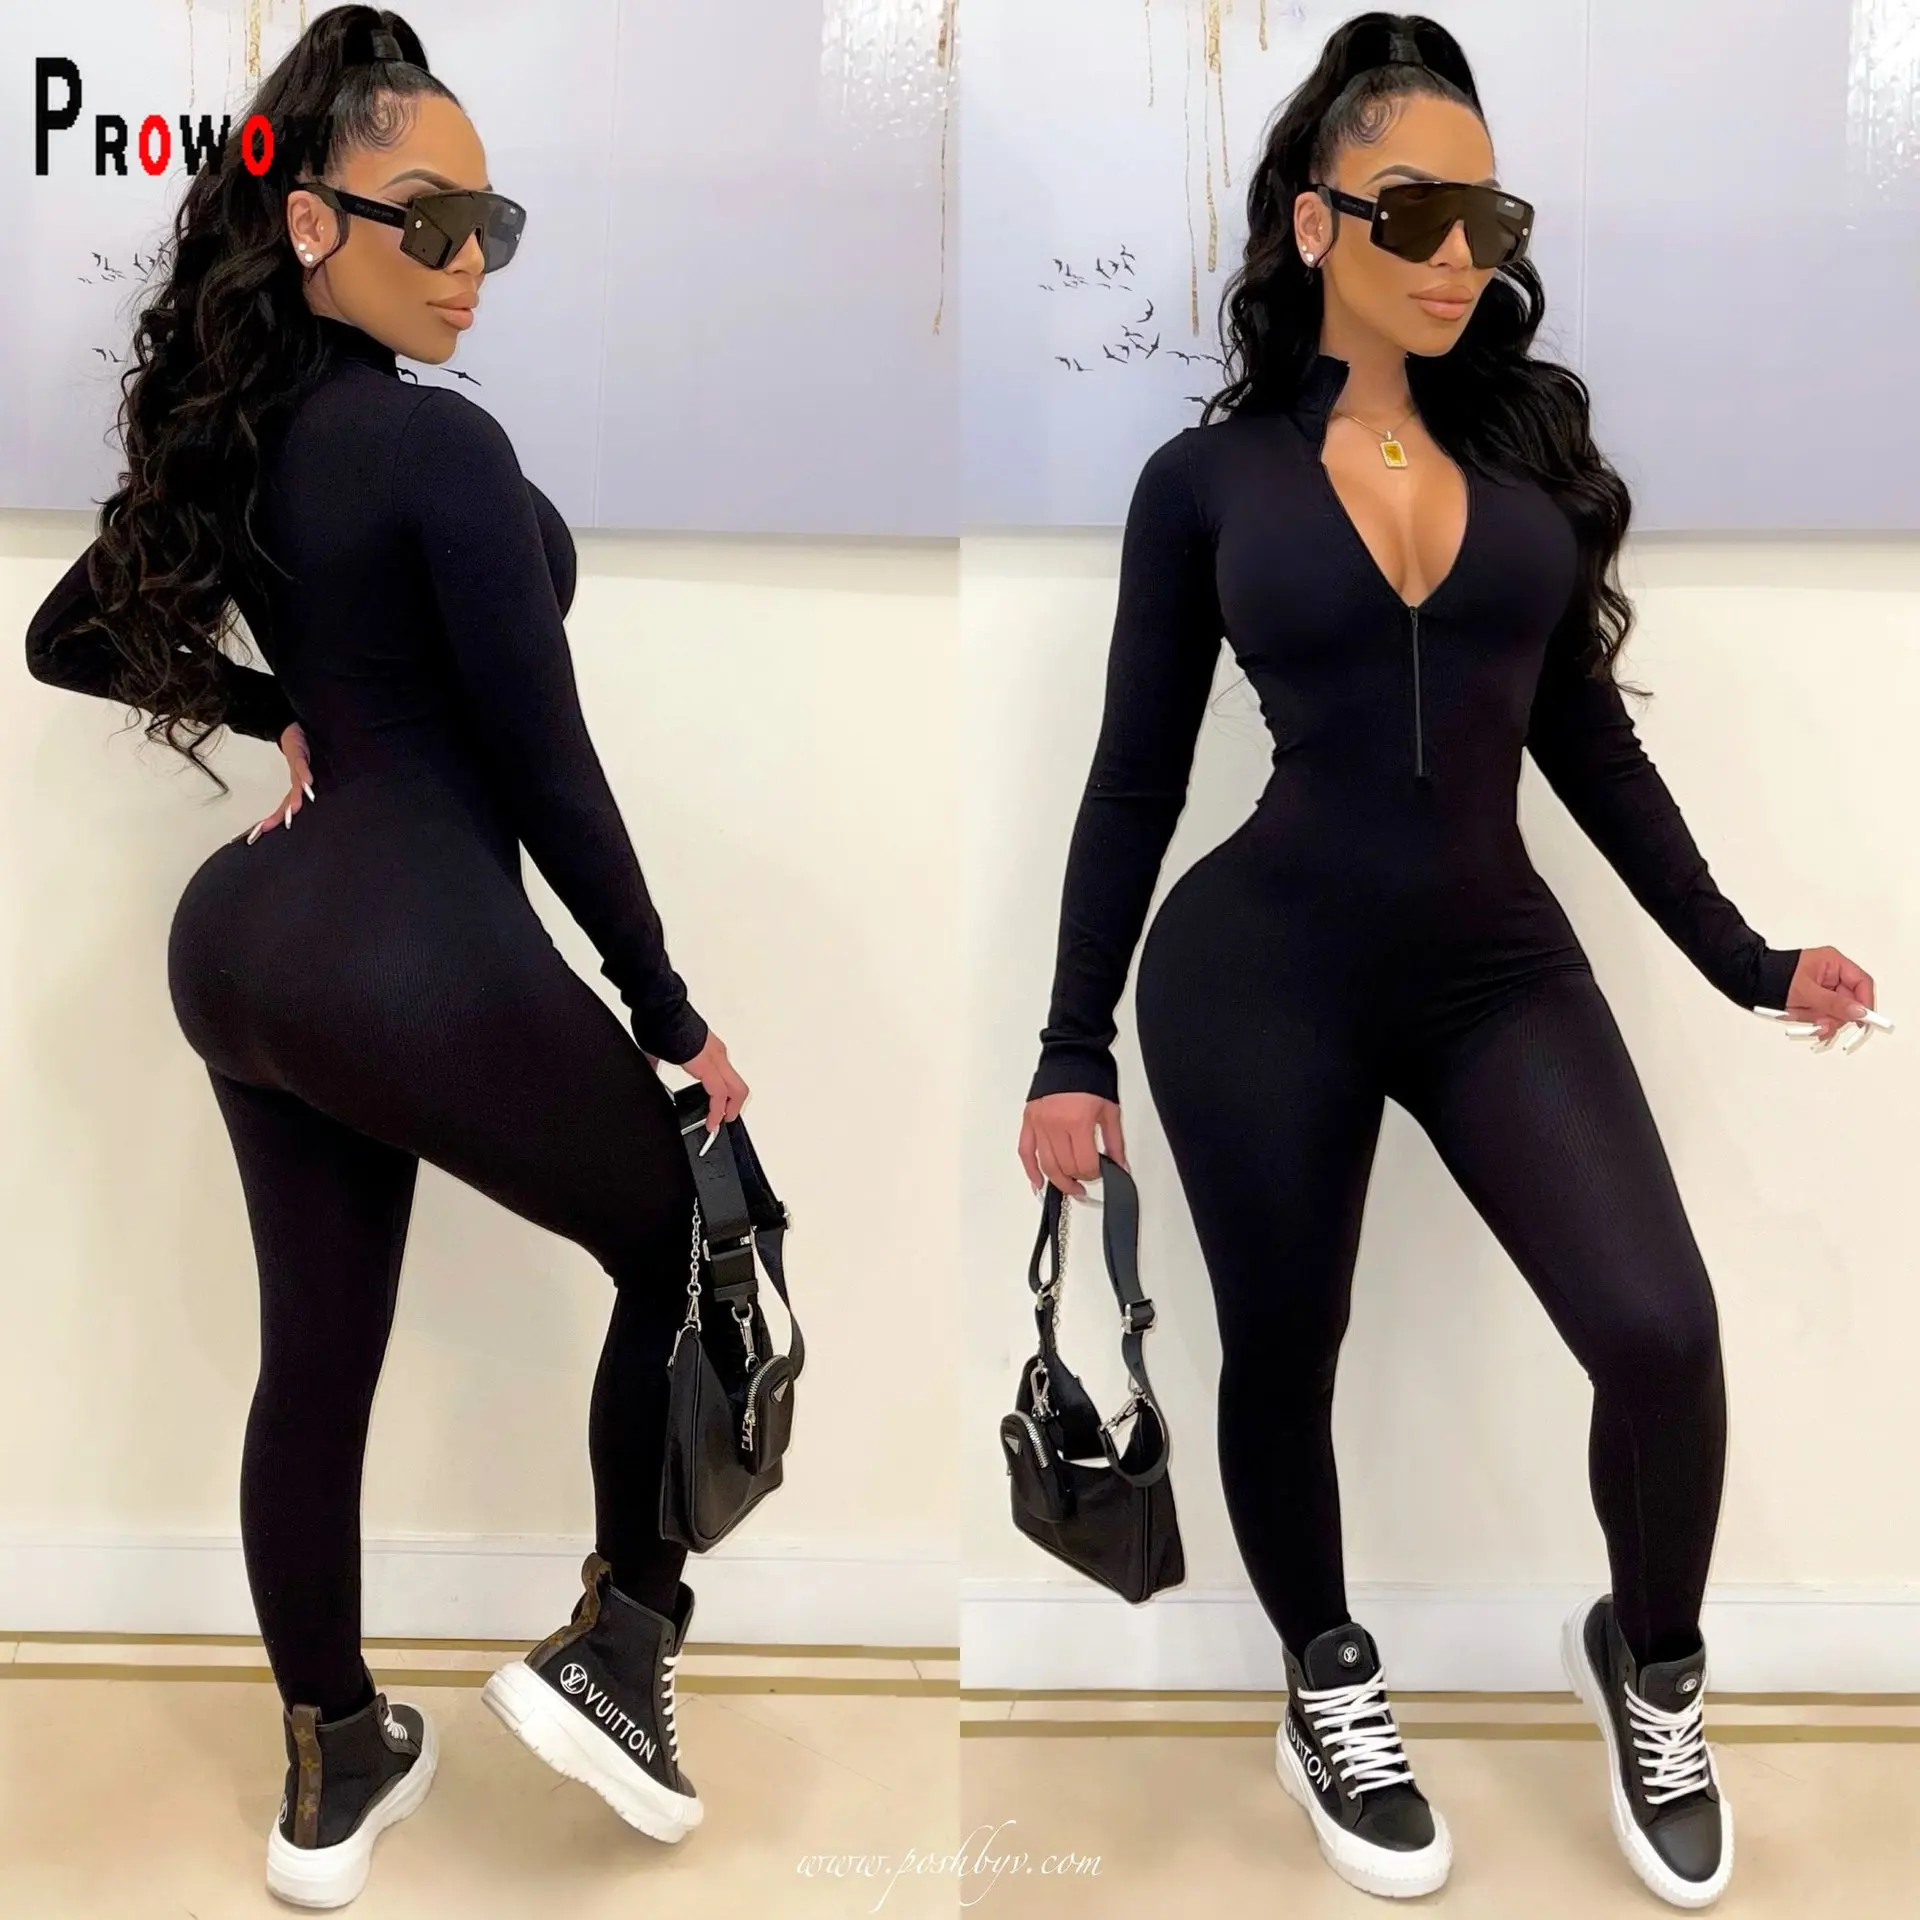 

Prowow Women Jumpsuits Zipper Bodycon One Piece Romper Ribbed Stacked High Elastic Skinny Clothing Fall Winter Female Outfit